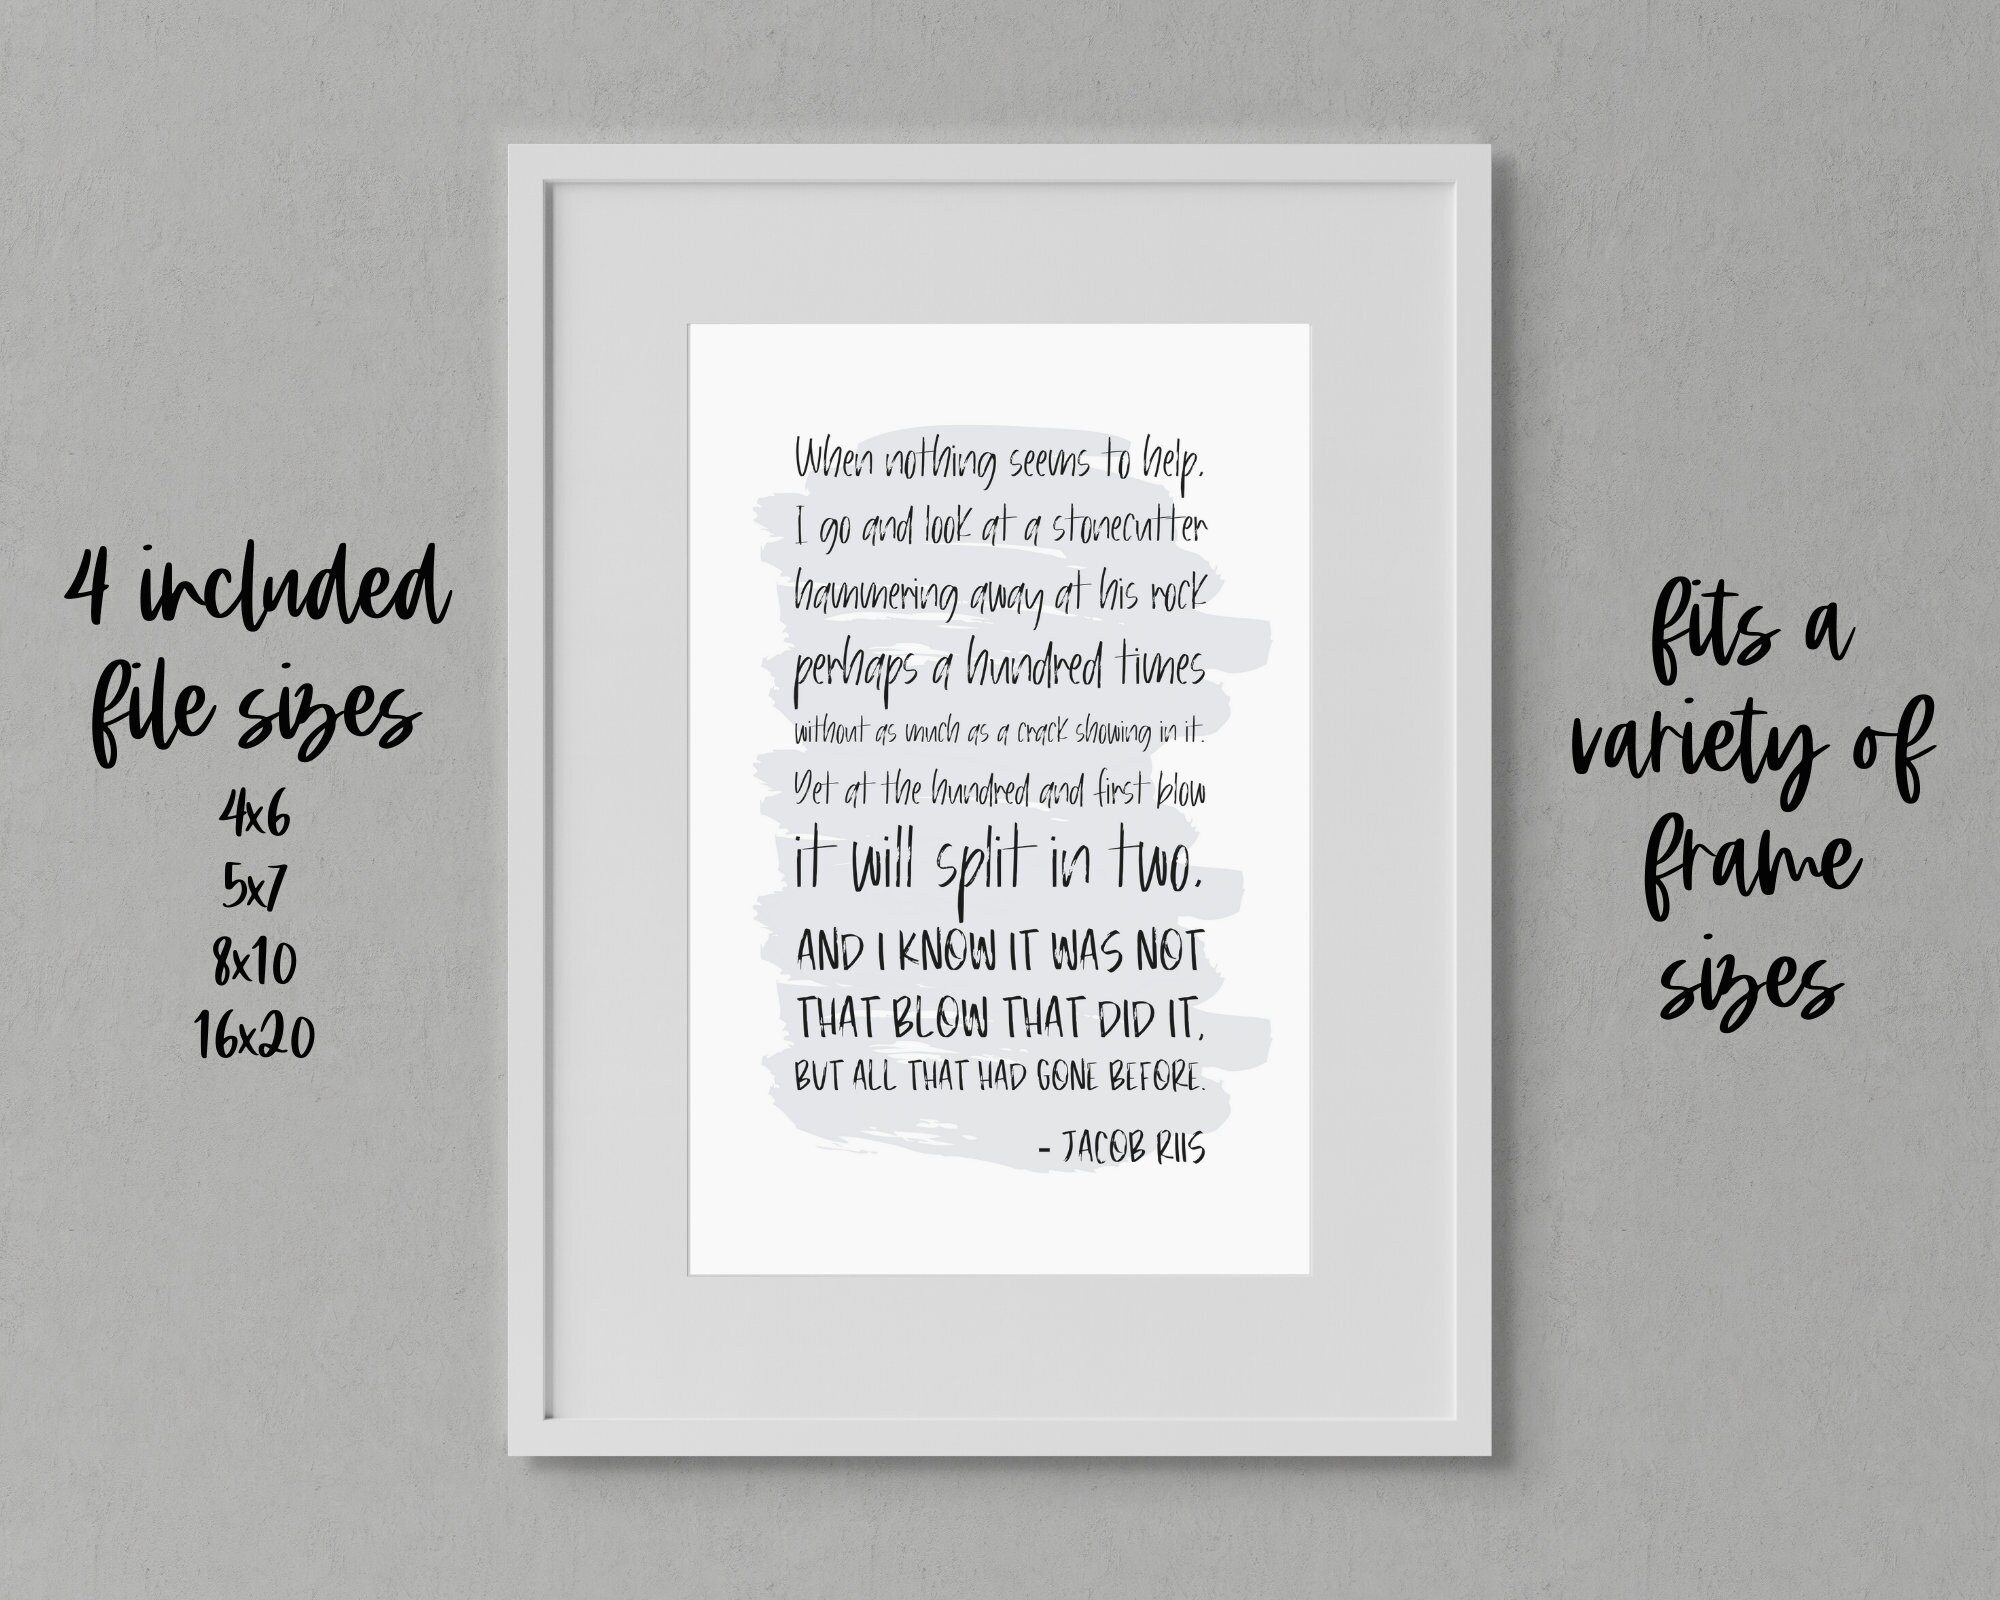 stonecutter-s-credo-printable-pound-the-rock-quote-etsy